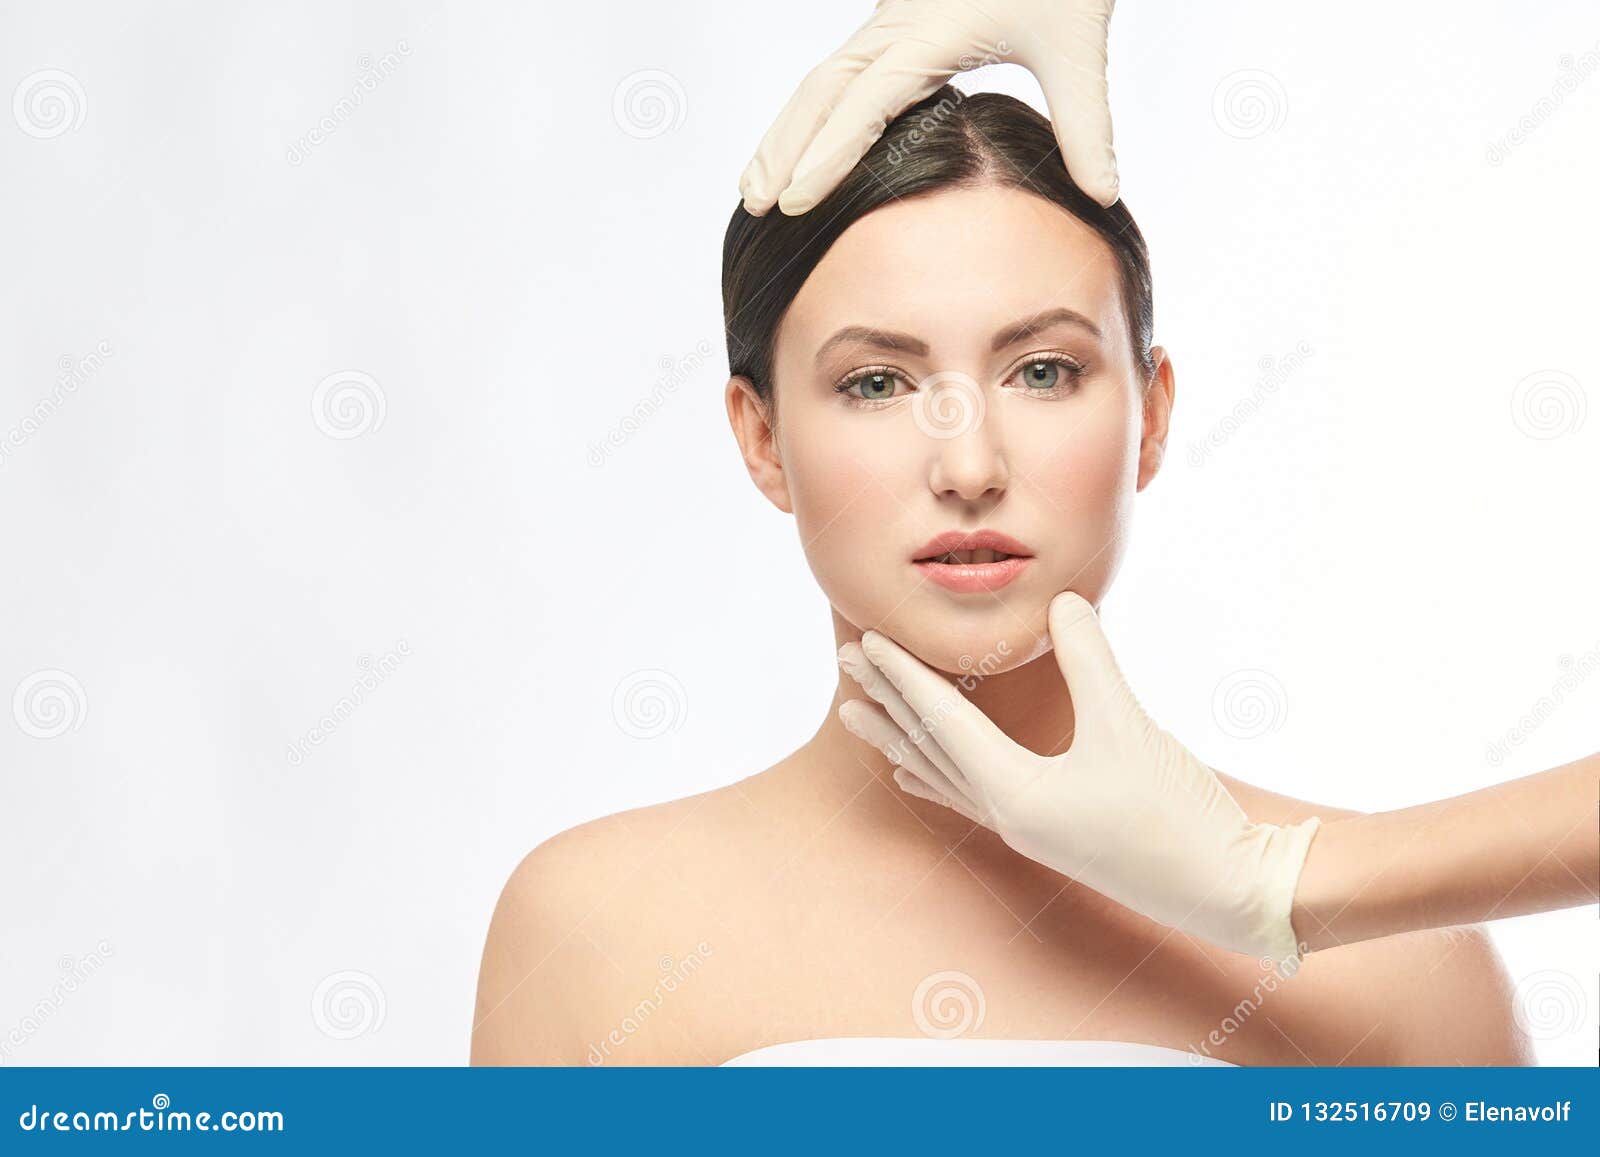 plastic medical consultation. doctor hands. woman face